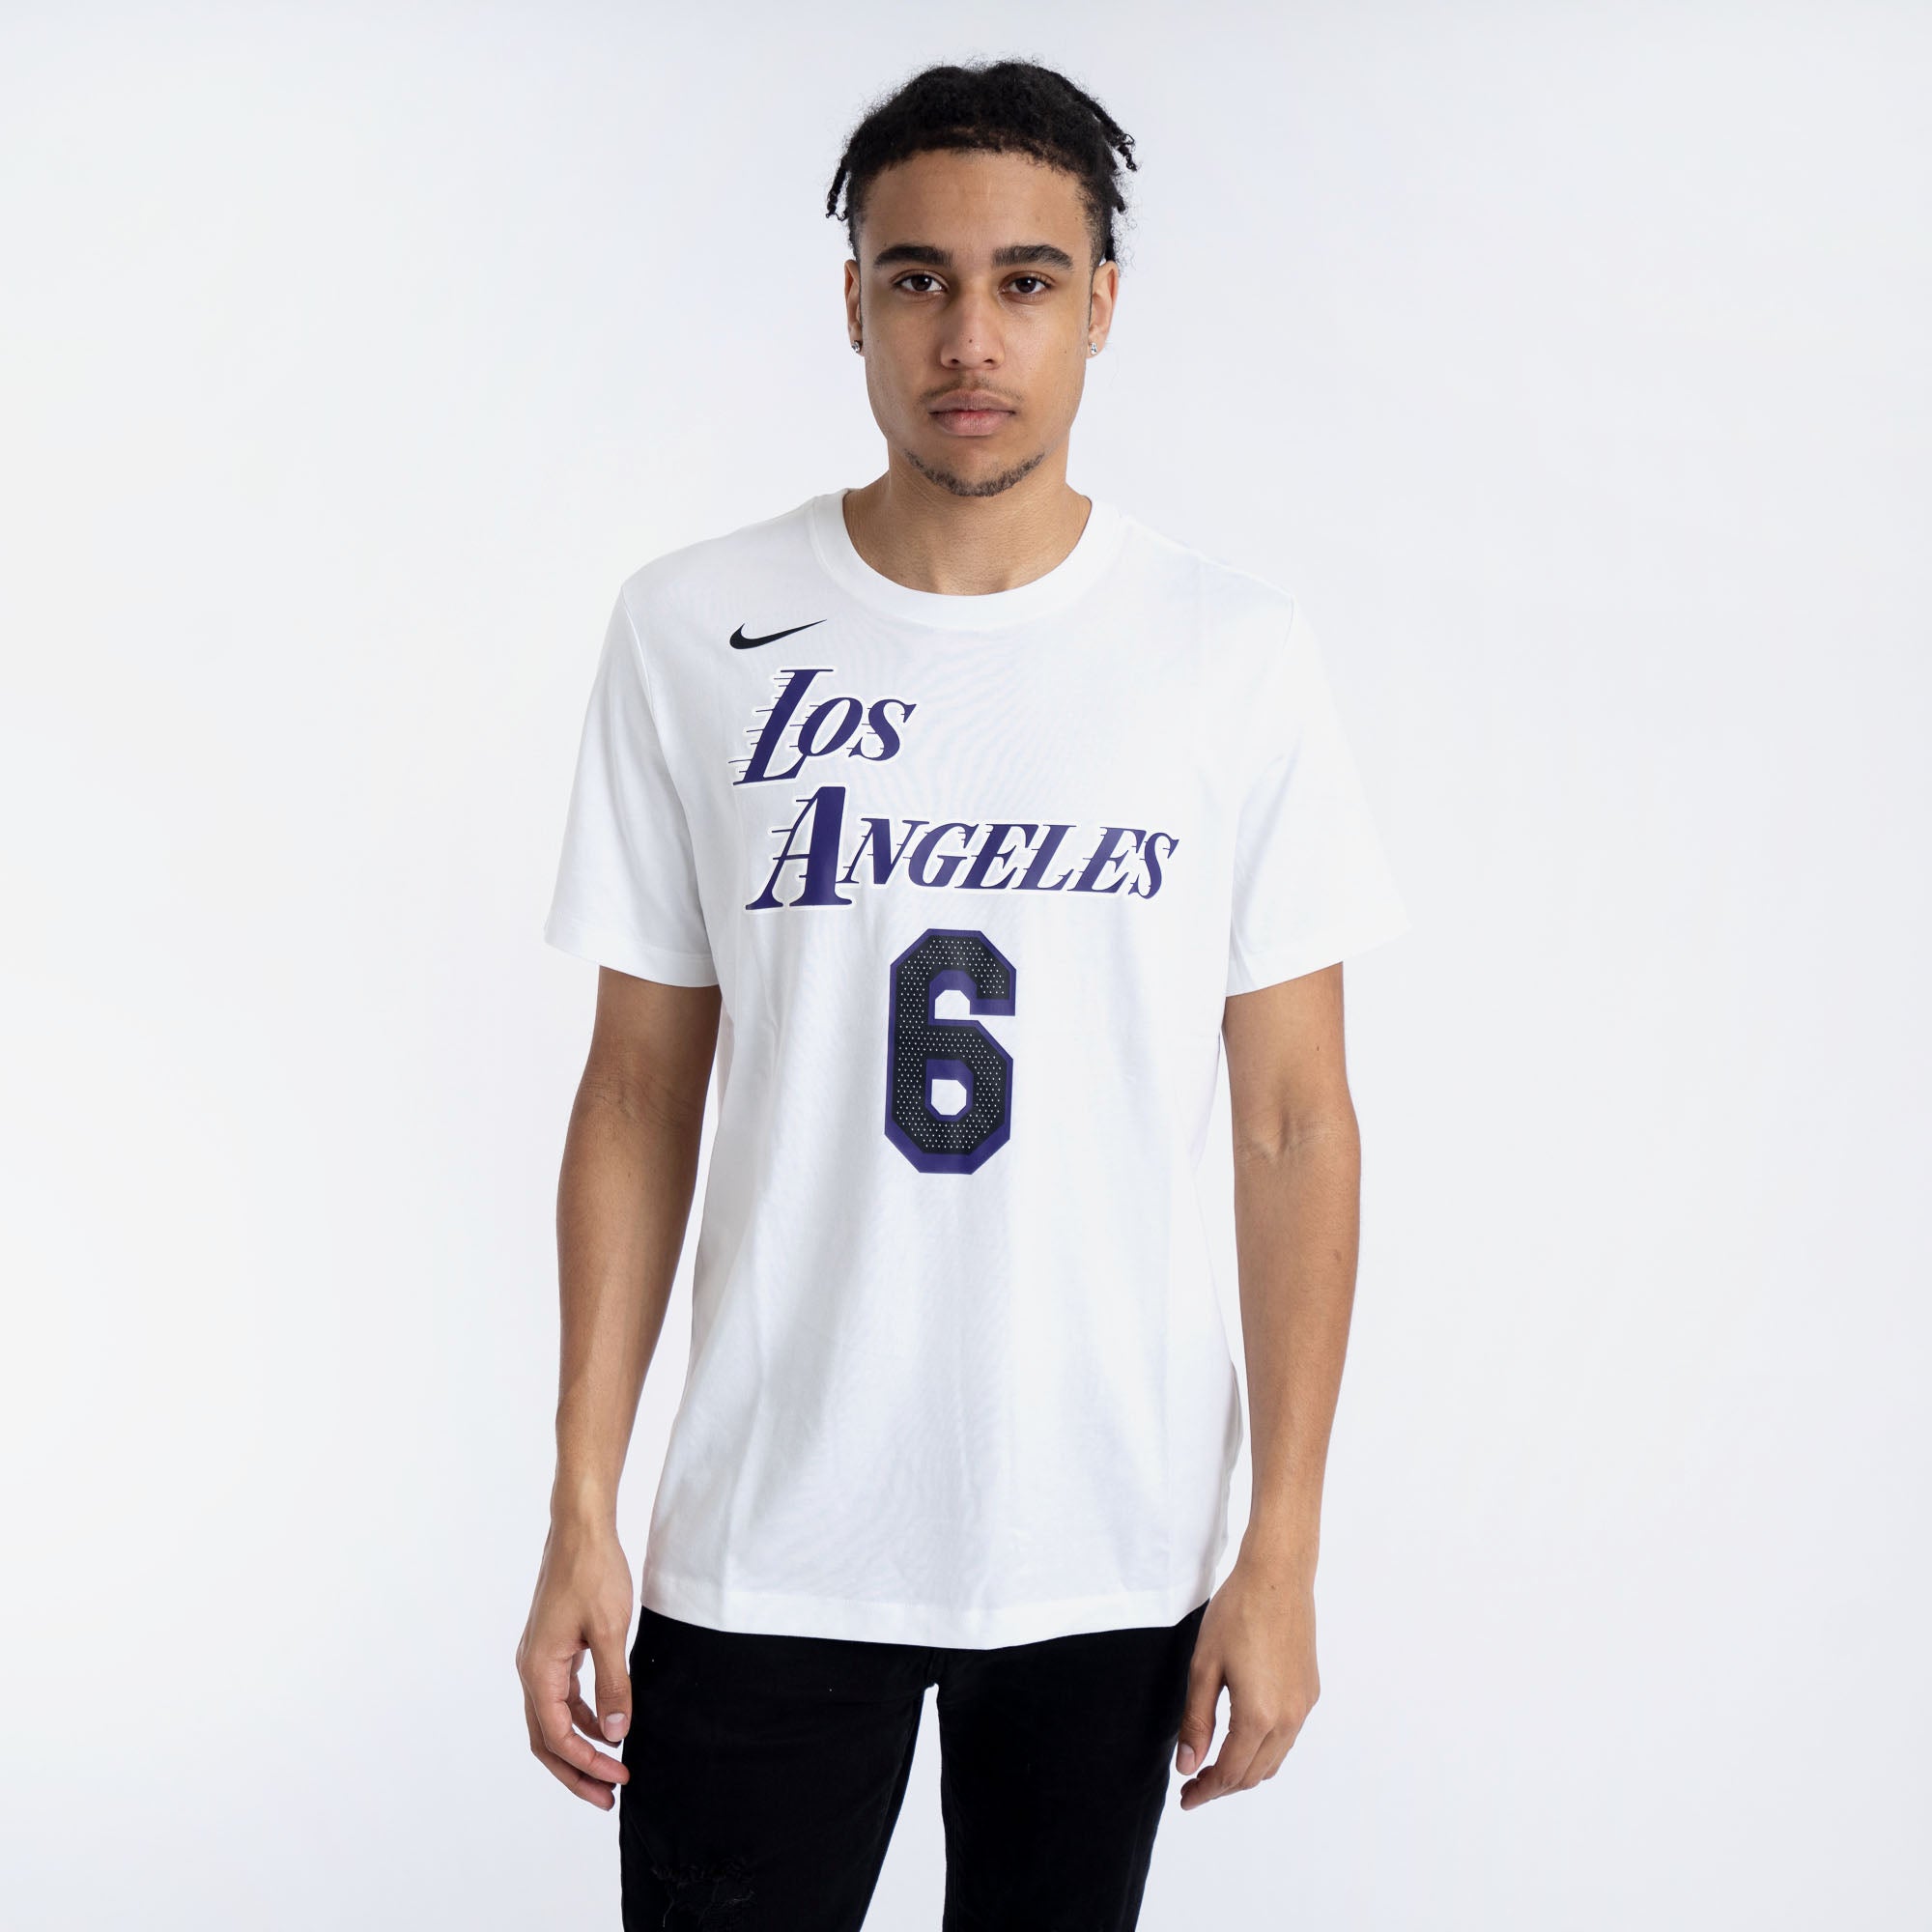 los angeles lakers practice t shirt